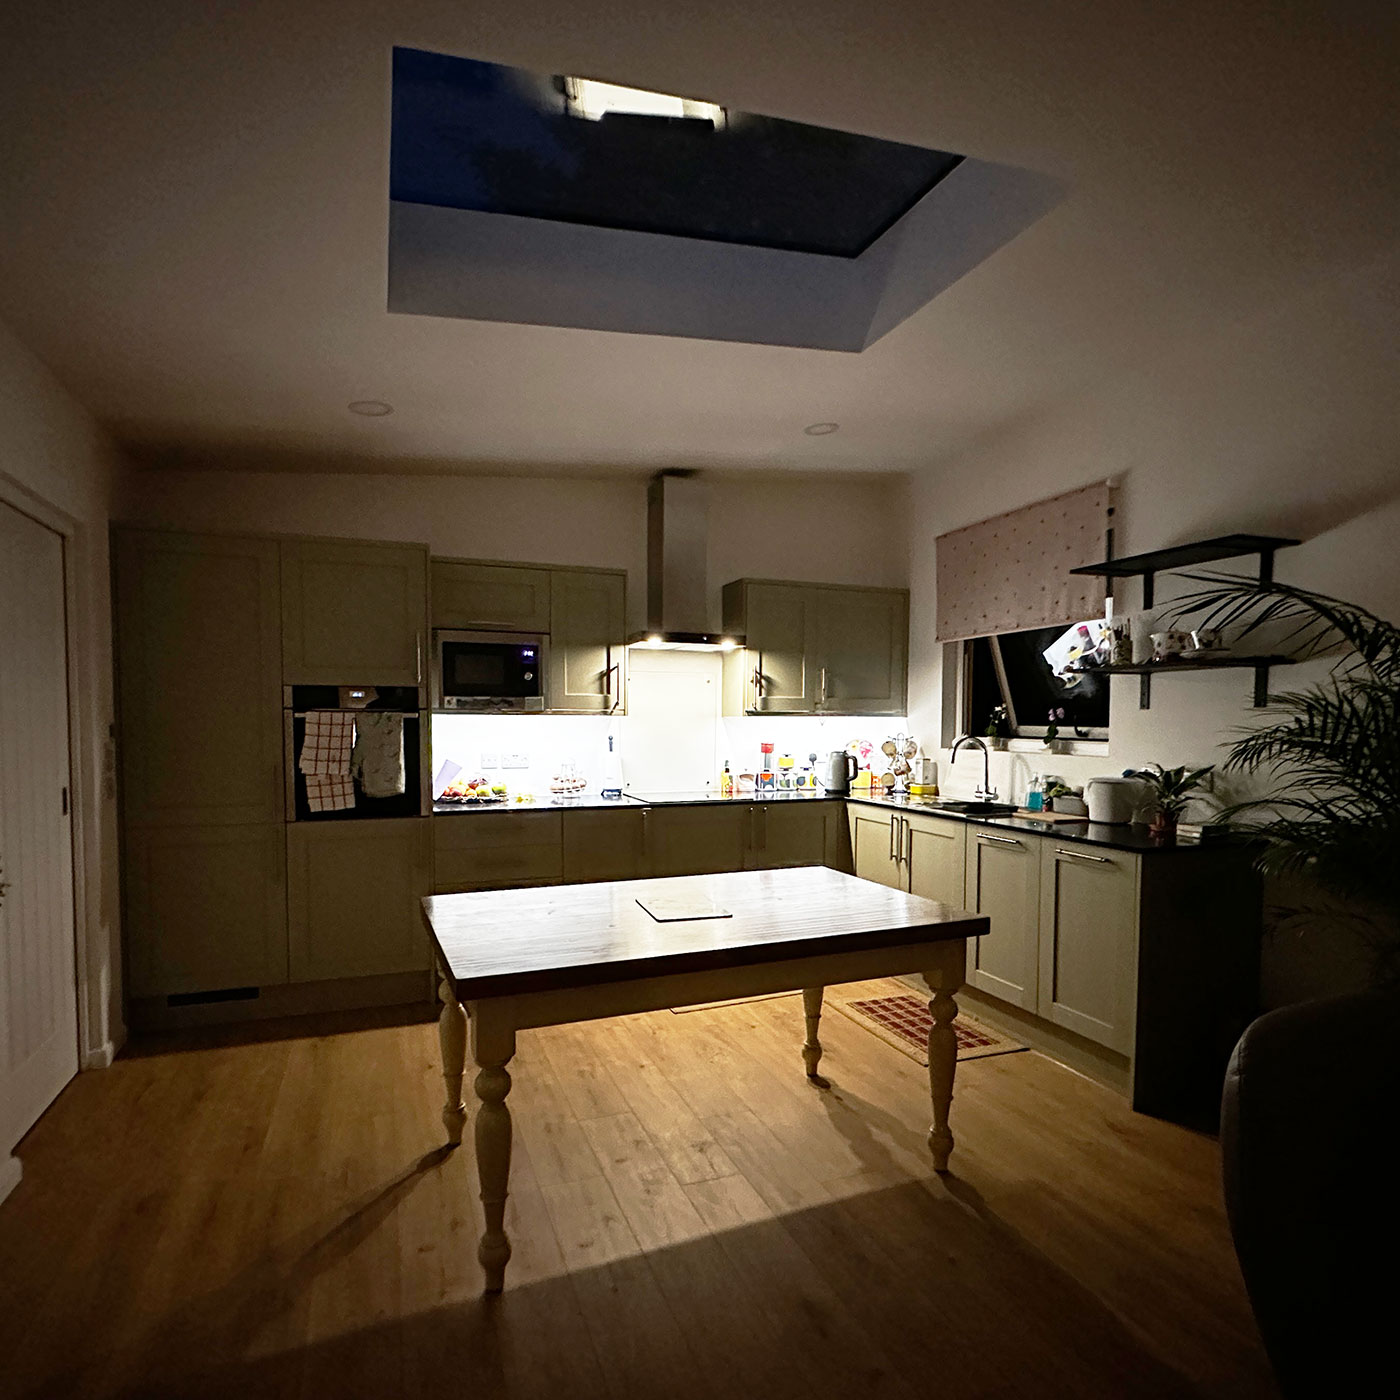 Mobile home kitchen area with skylight